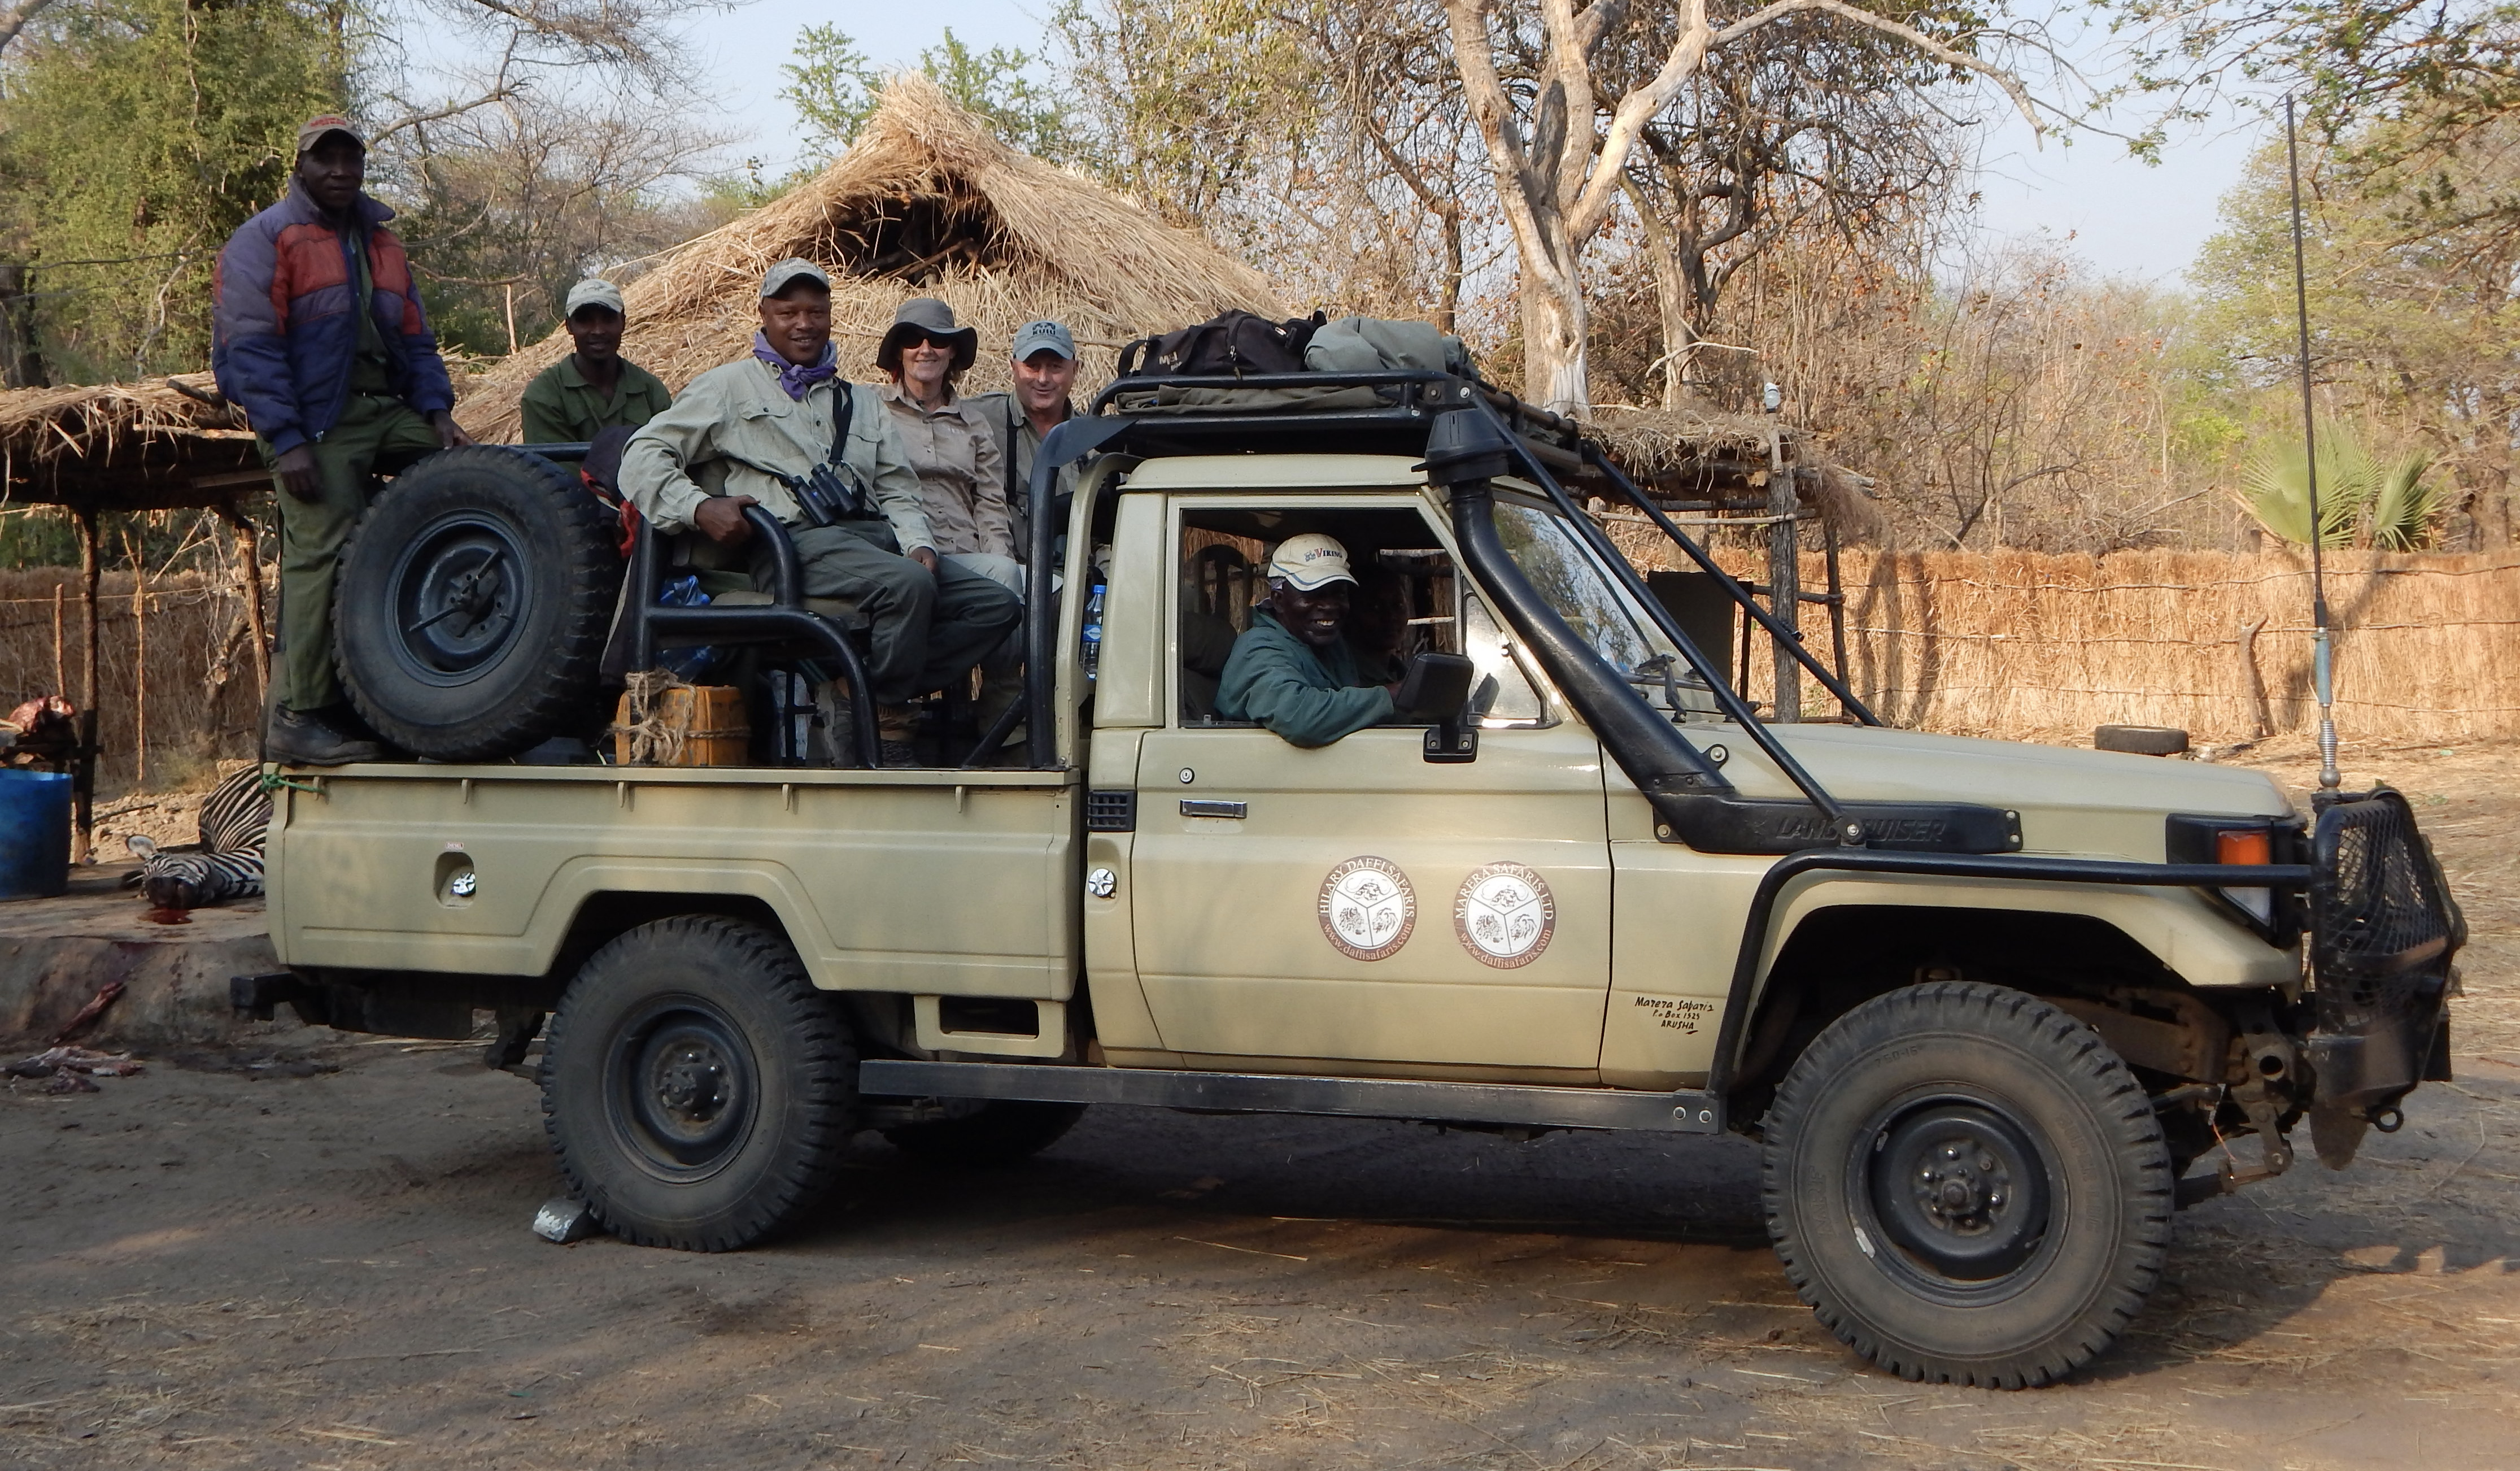 Sue Tidwell-Big game hunting-AFrican safari adventure-wildlife conservation-This is how we roll.jpg